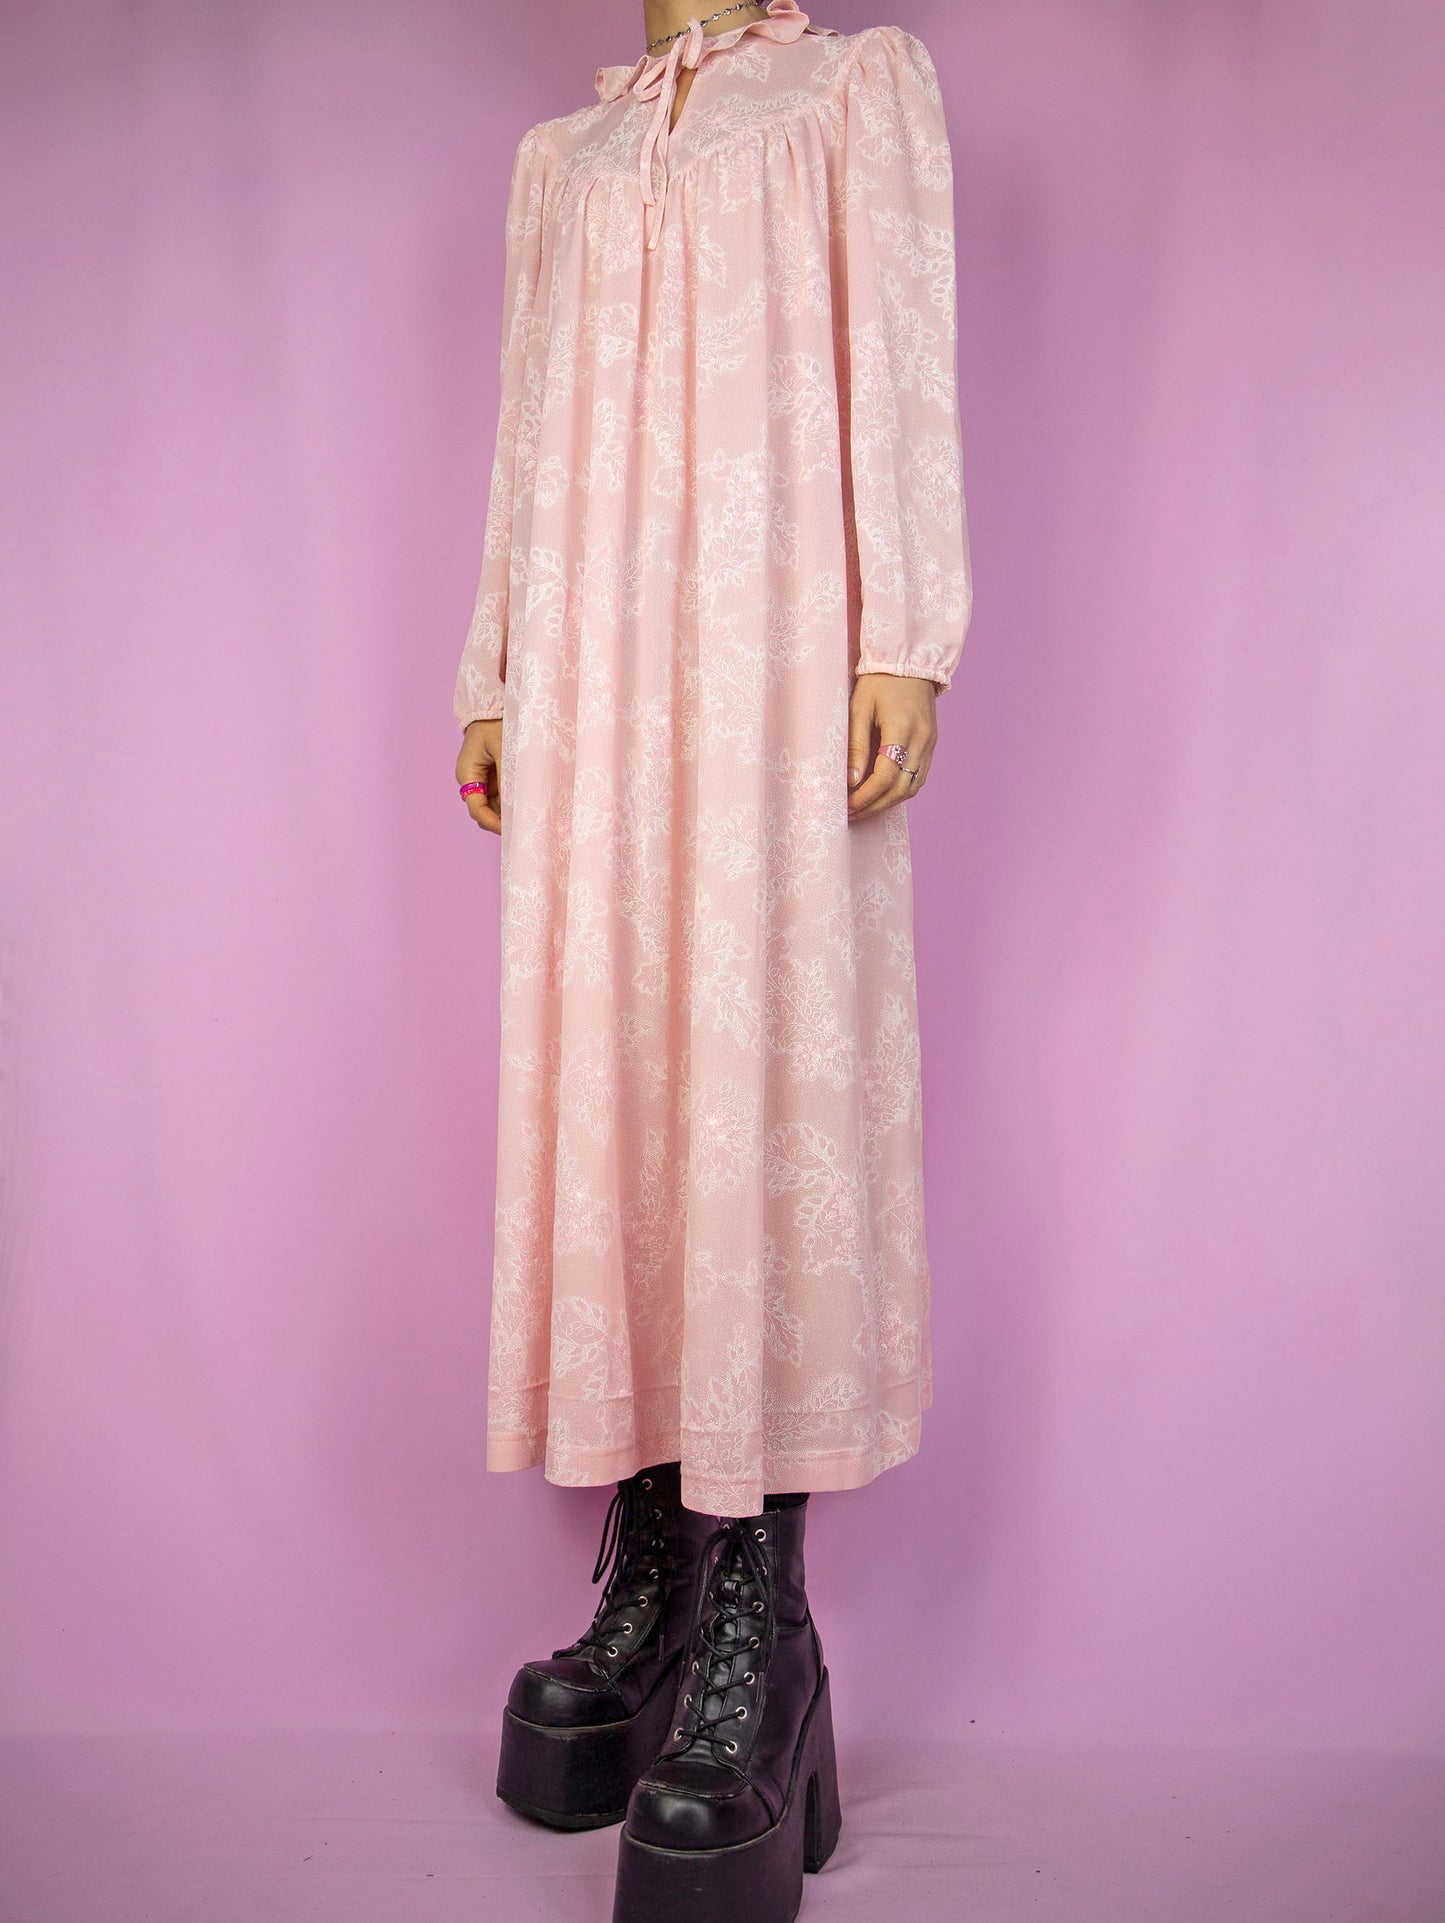 The Vintage 90s Pink Nightgown Dress is a pastel pink floral long sleeve midi dress with a tied-up front ruffle neckline. Lovely romantic sleepwear 1990s night dress.